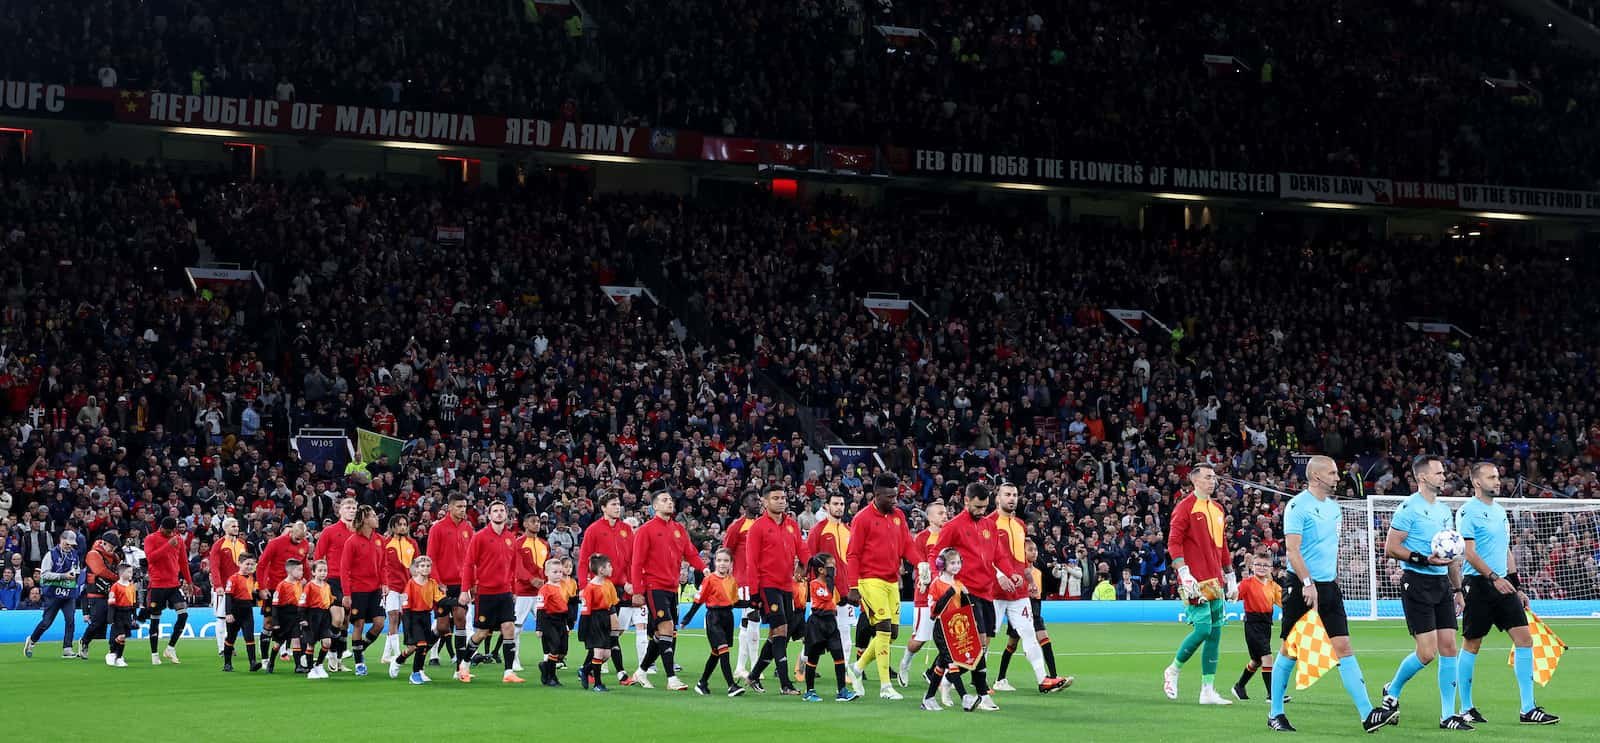 Manchester United apologise for “unacceptable” ticket fiasco during clash vs. Galatasaray – Man United News And Transfer News